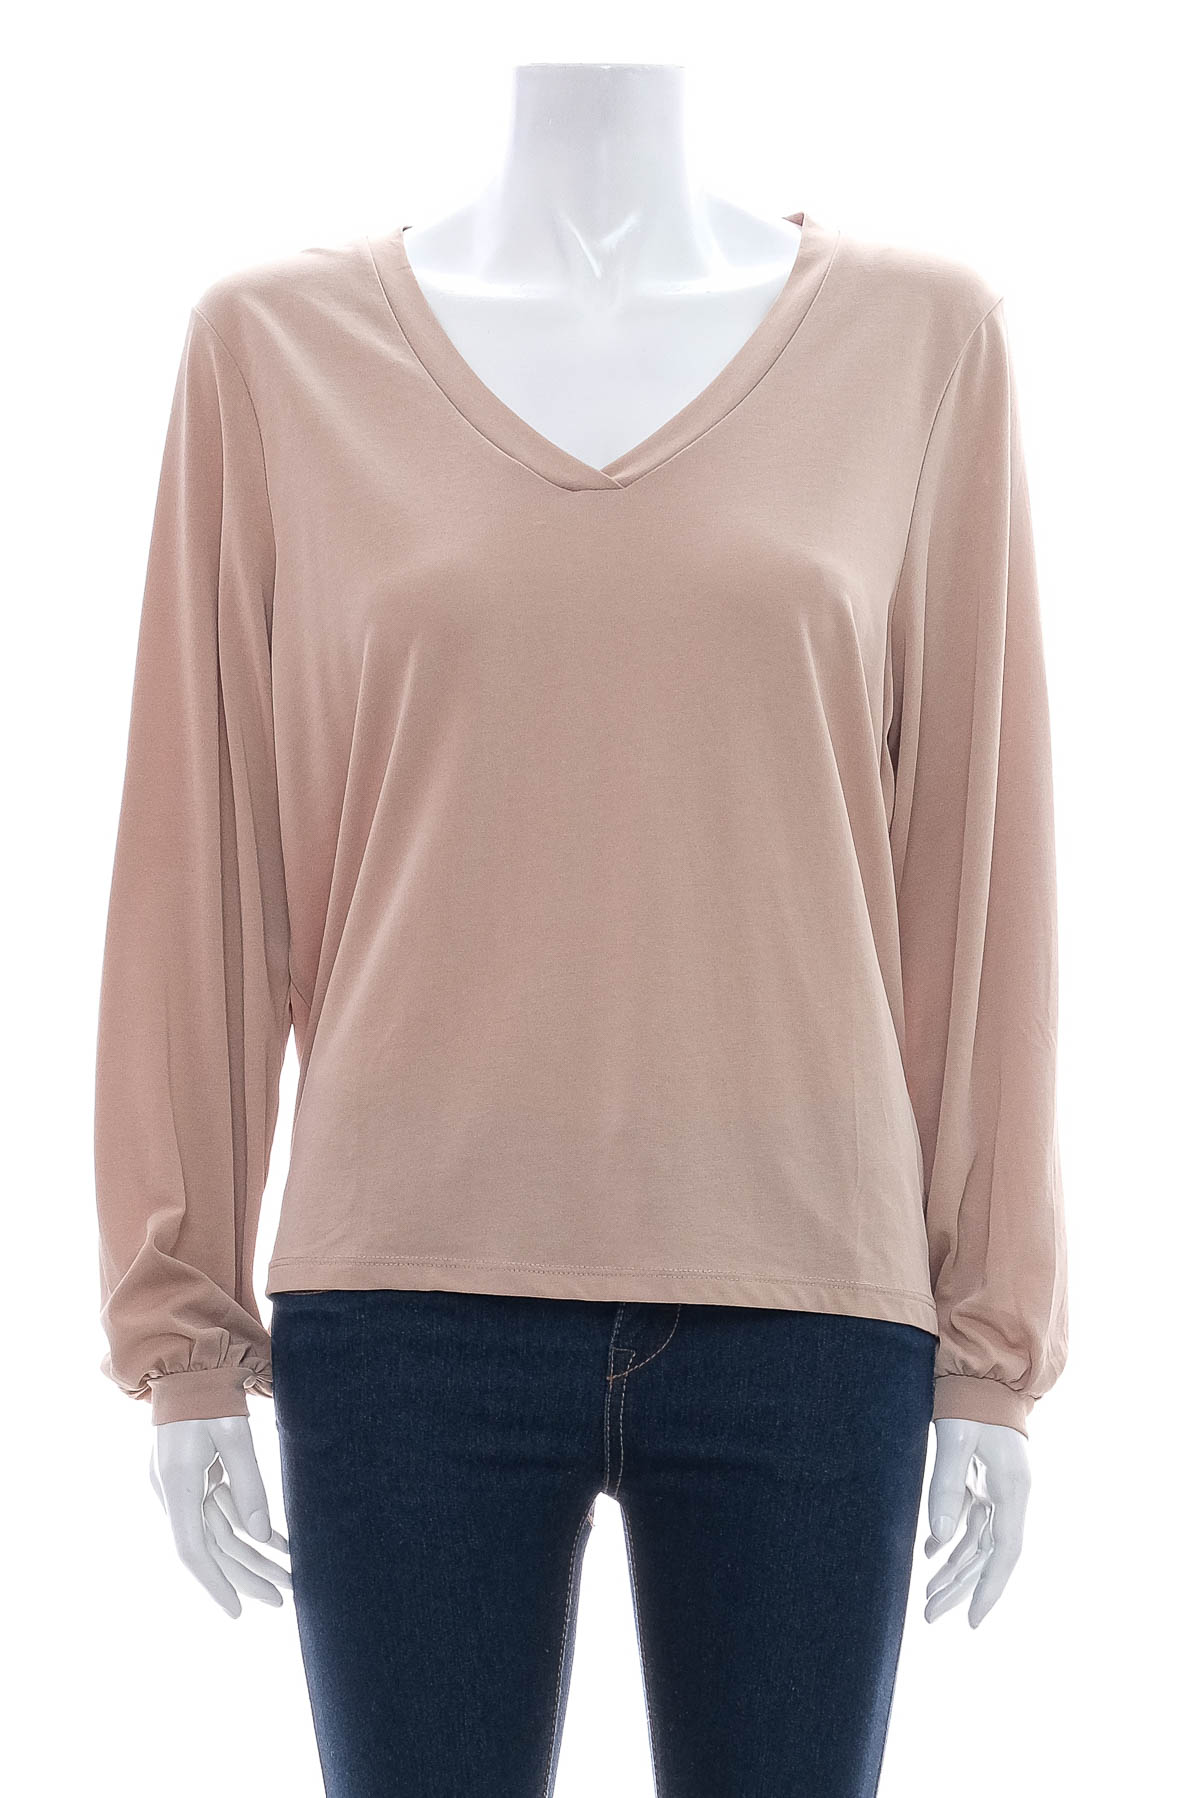 Women's blouse - ONLY - 0